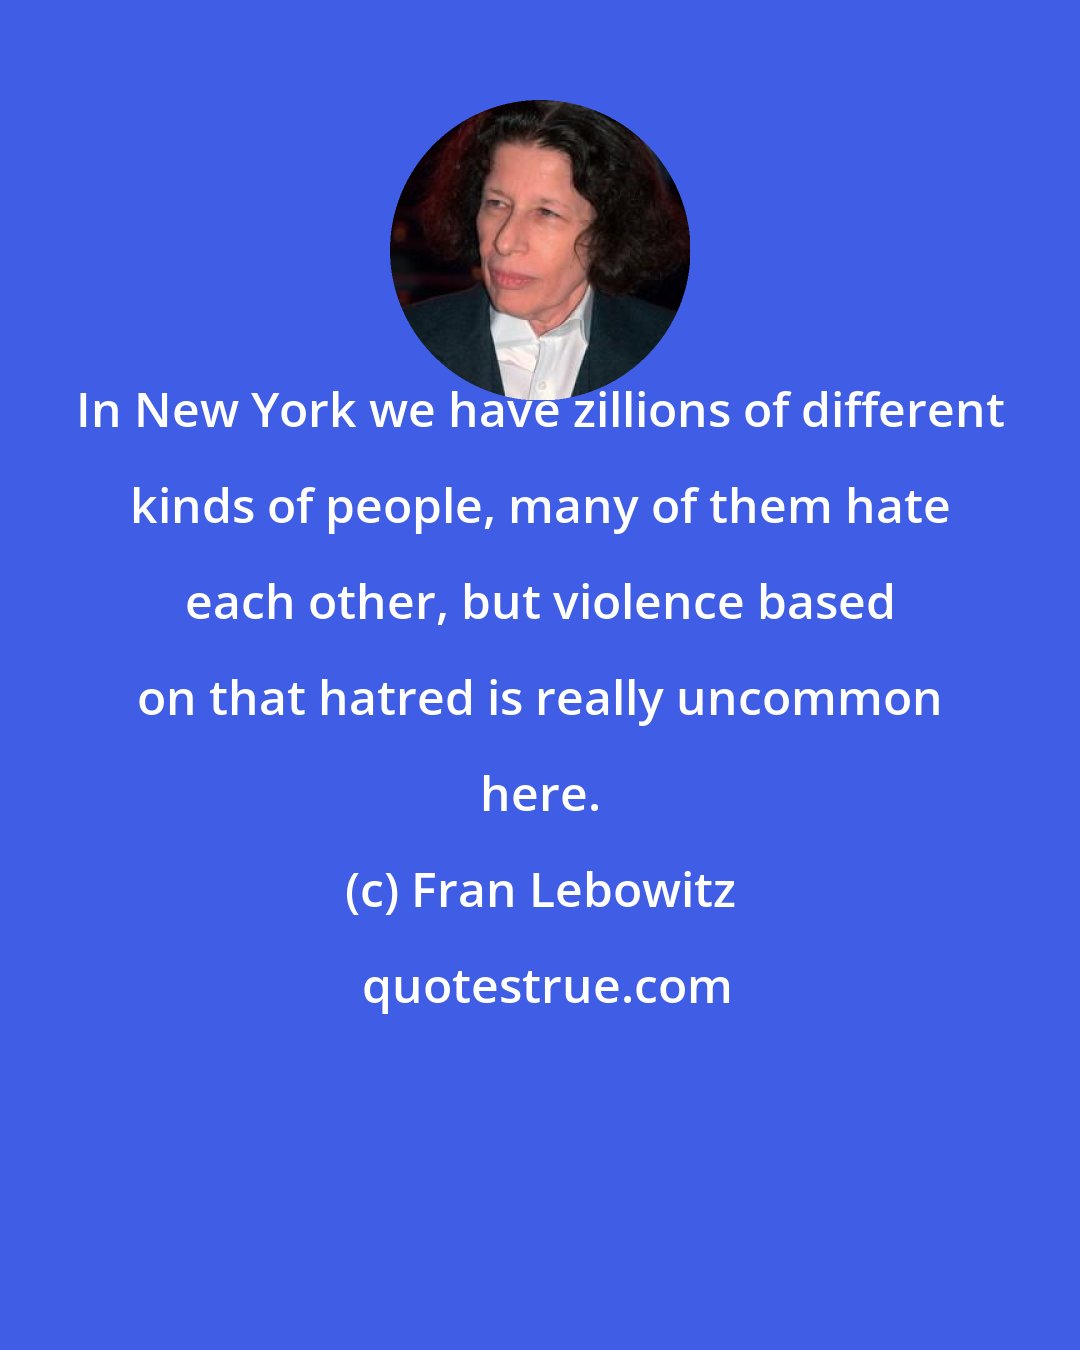 Fran Lebowitz: In New York we have zillions of different kinds of people, many of them hate each other, but violence based on that hatred is really uncommon here.